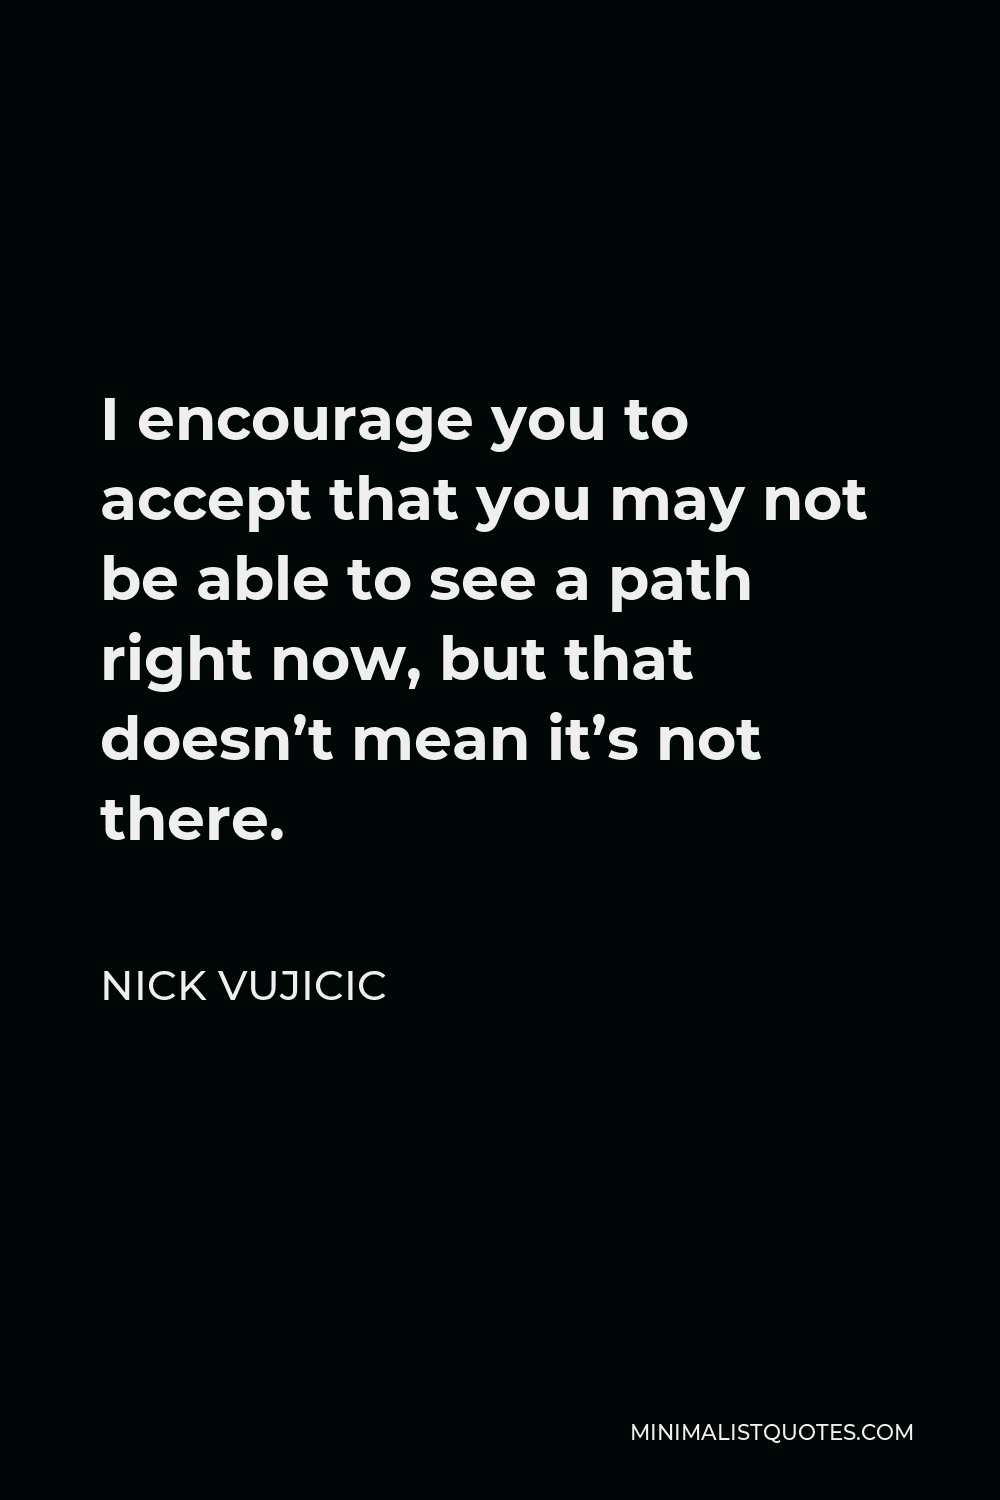 Nick Vujicic Quote - I encourage you to accept that you may not be able to see a path right now, but that doesn’t mean it’s not there.